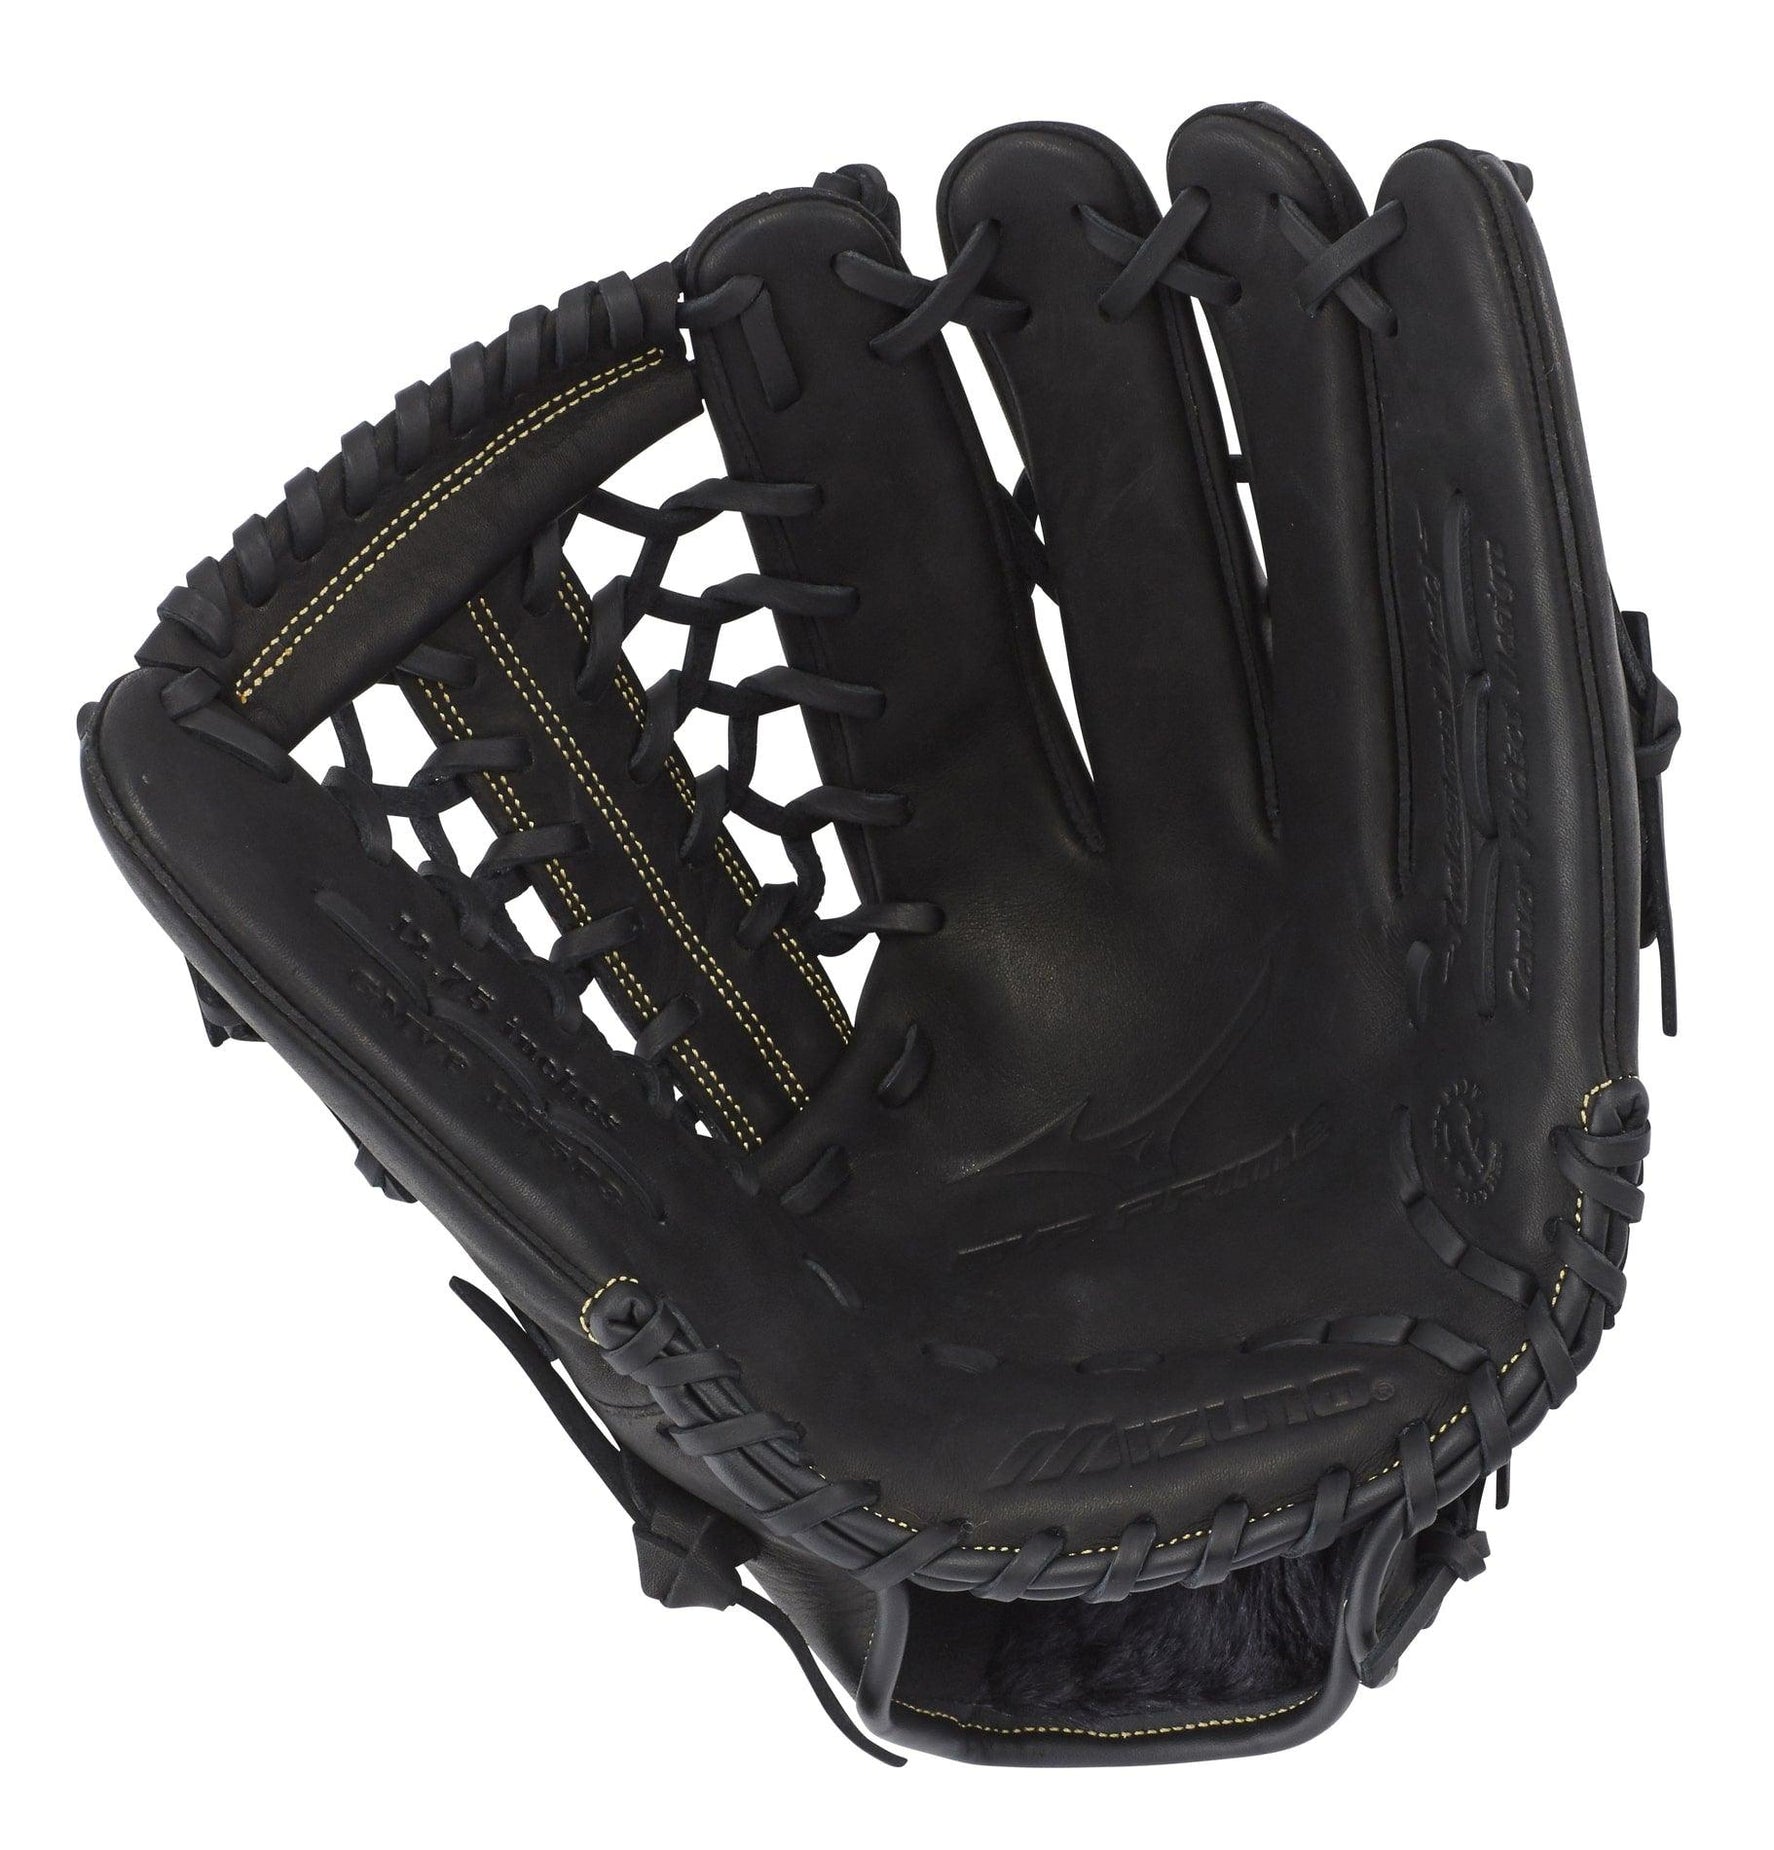 MVP Prime Outfield Baseball Glove 12.75" - Sports Excellence